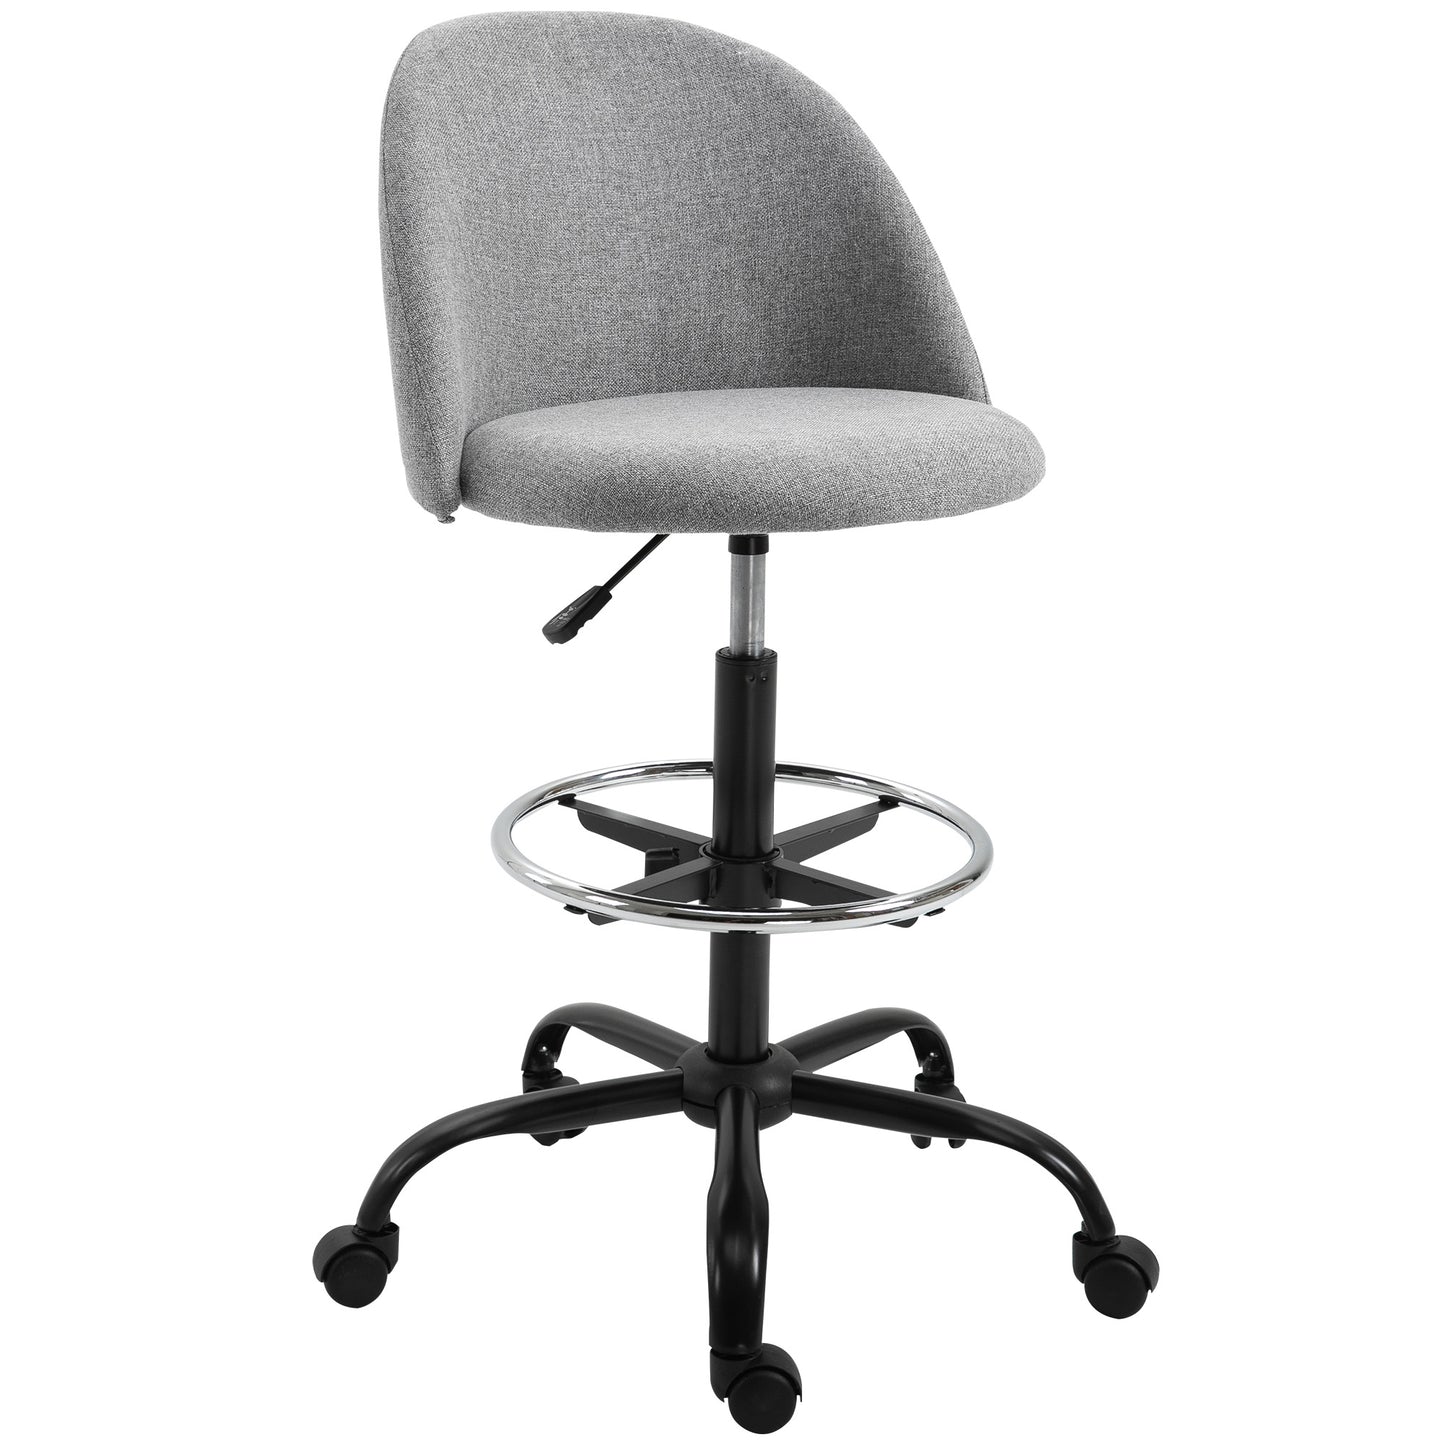 Vinsetto Padded Polyester Tall Design Office Chair Grey